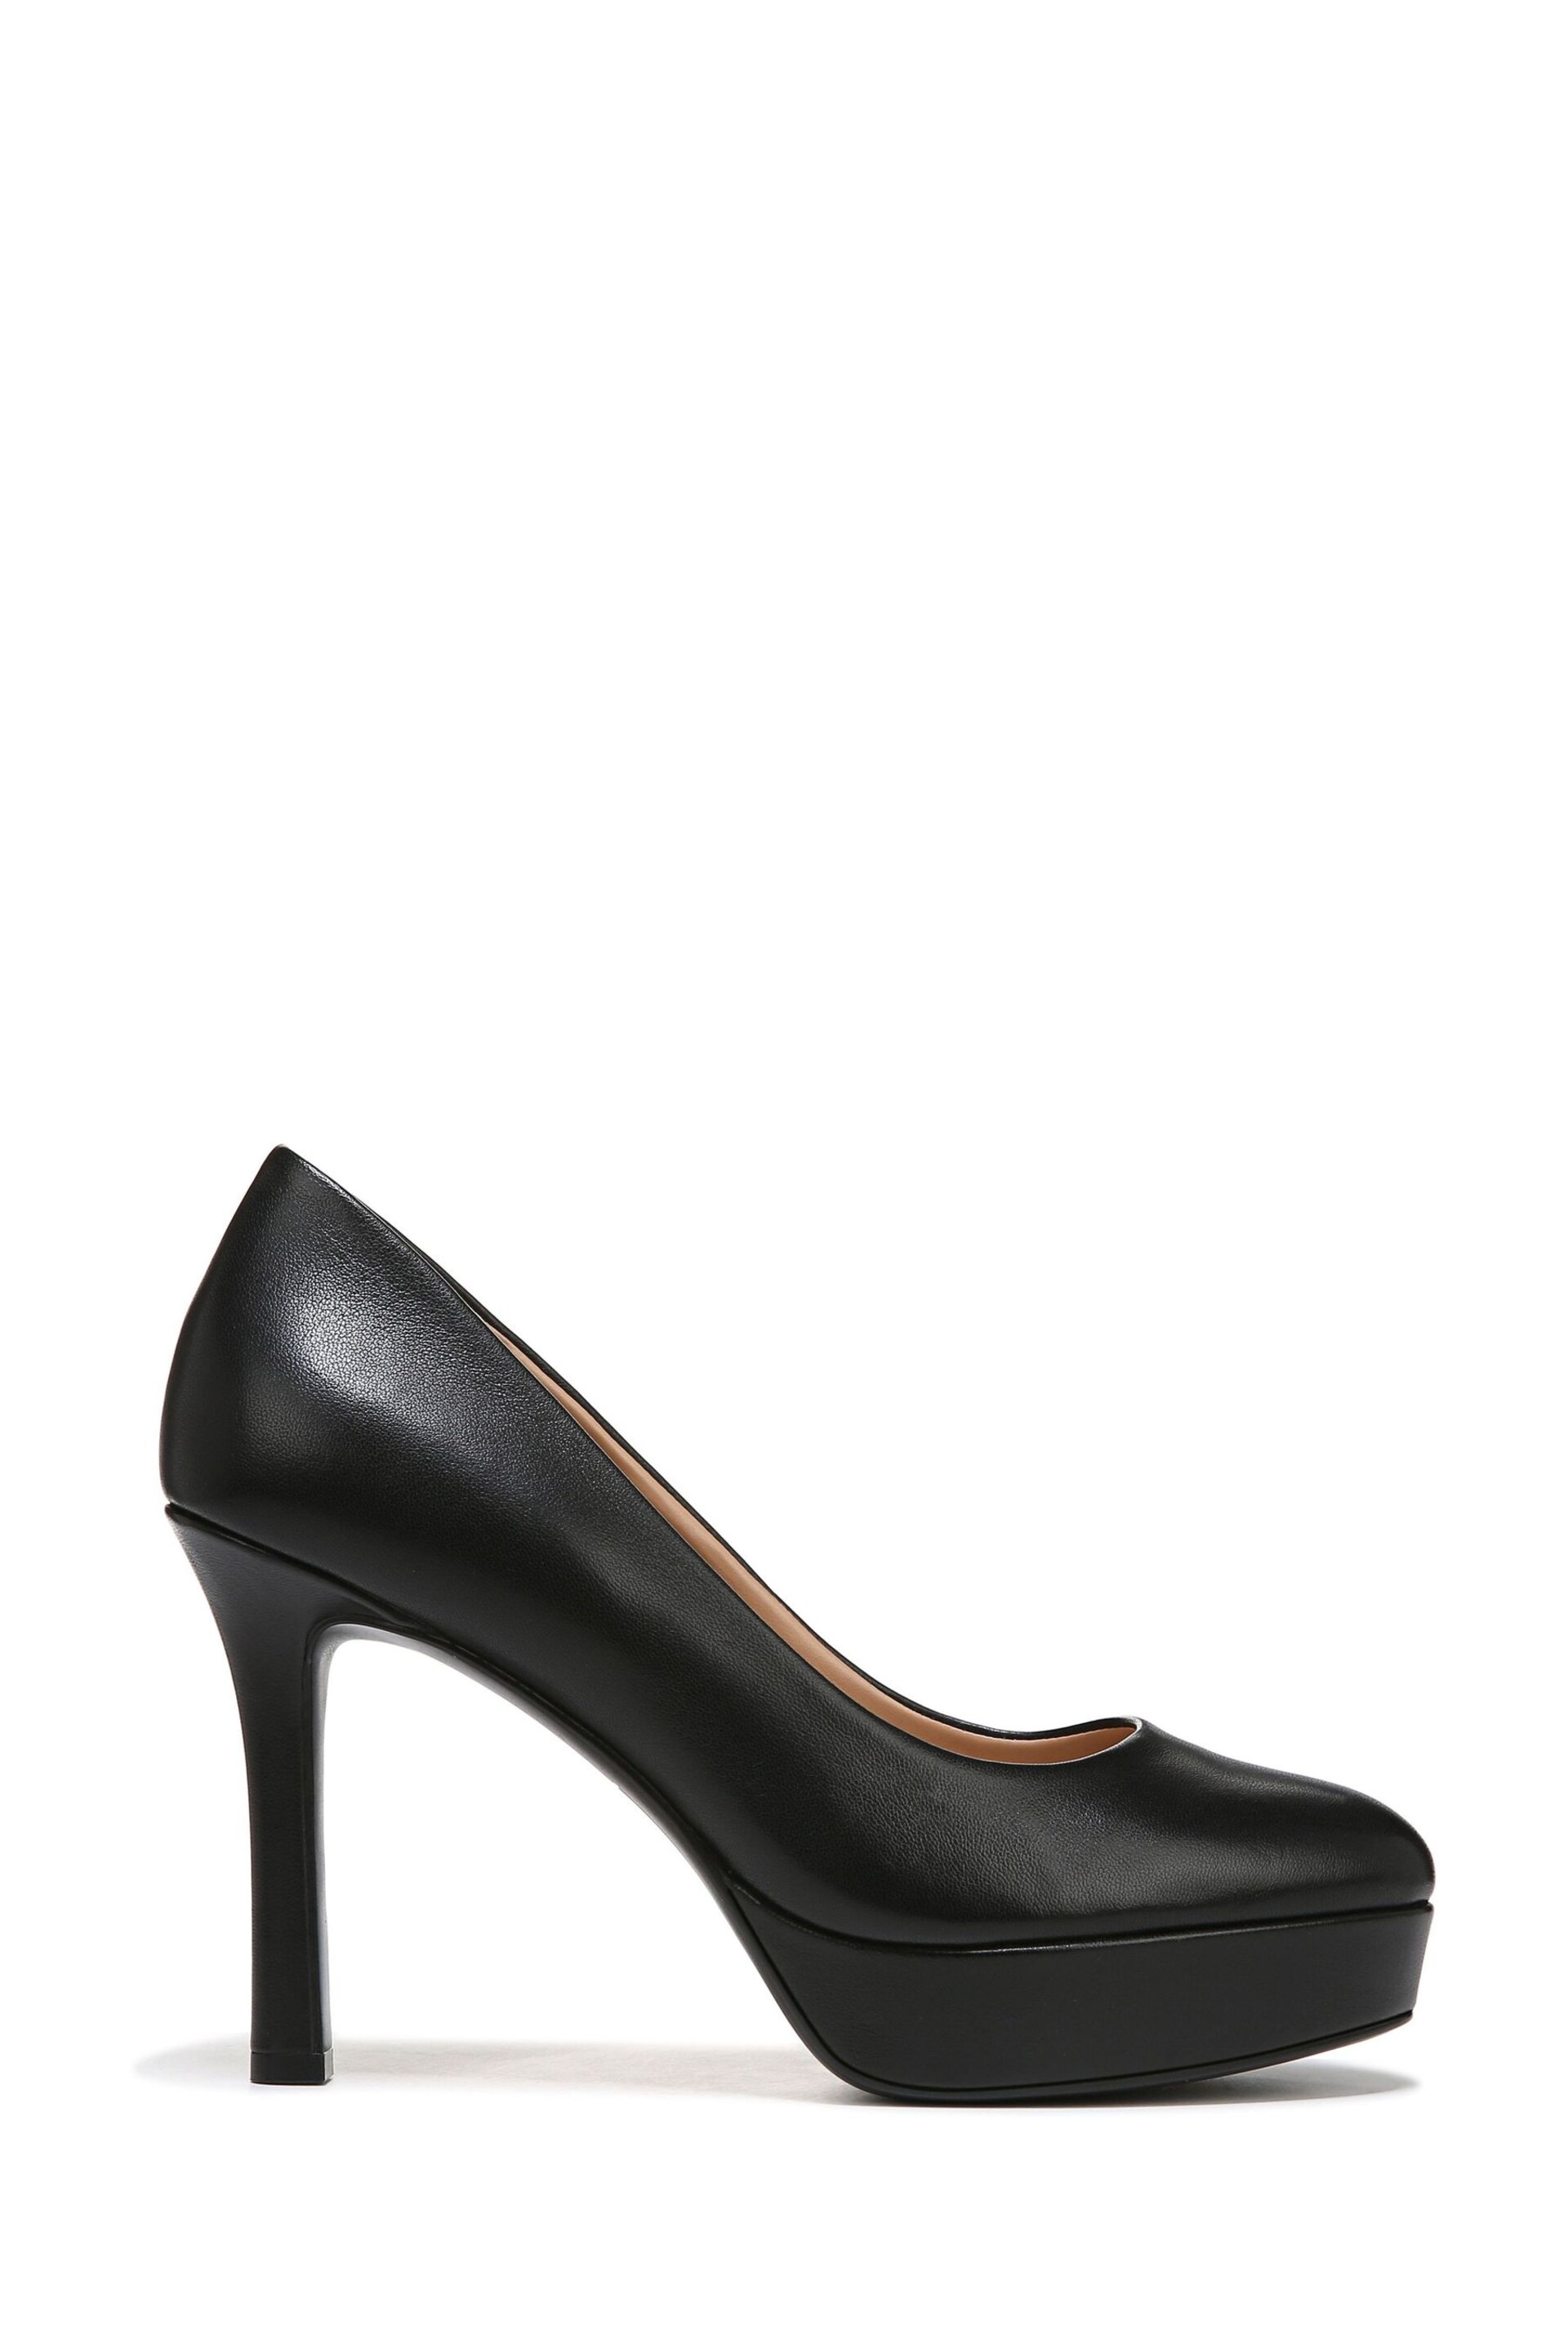 Naturalizer Court Leather Black Shoes - Image 1 of 7